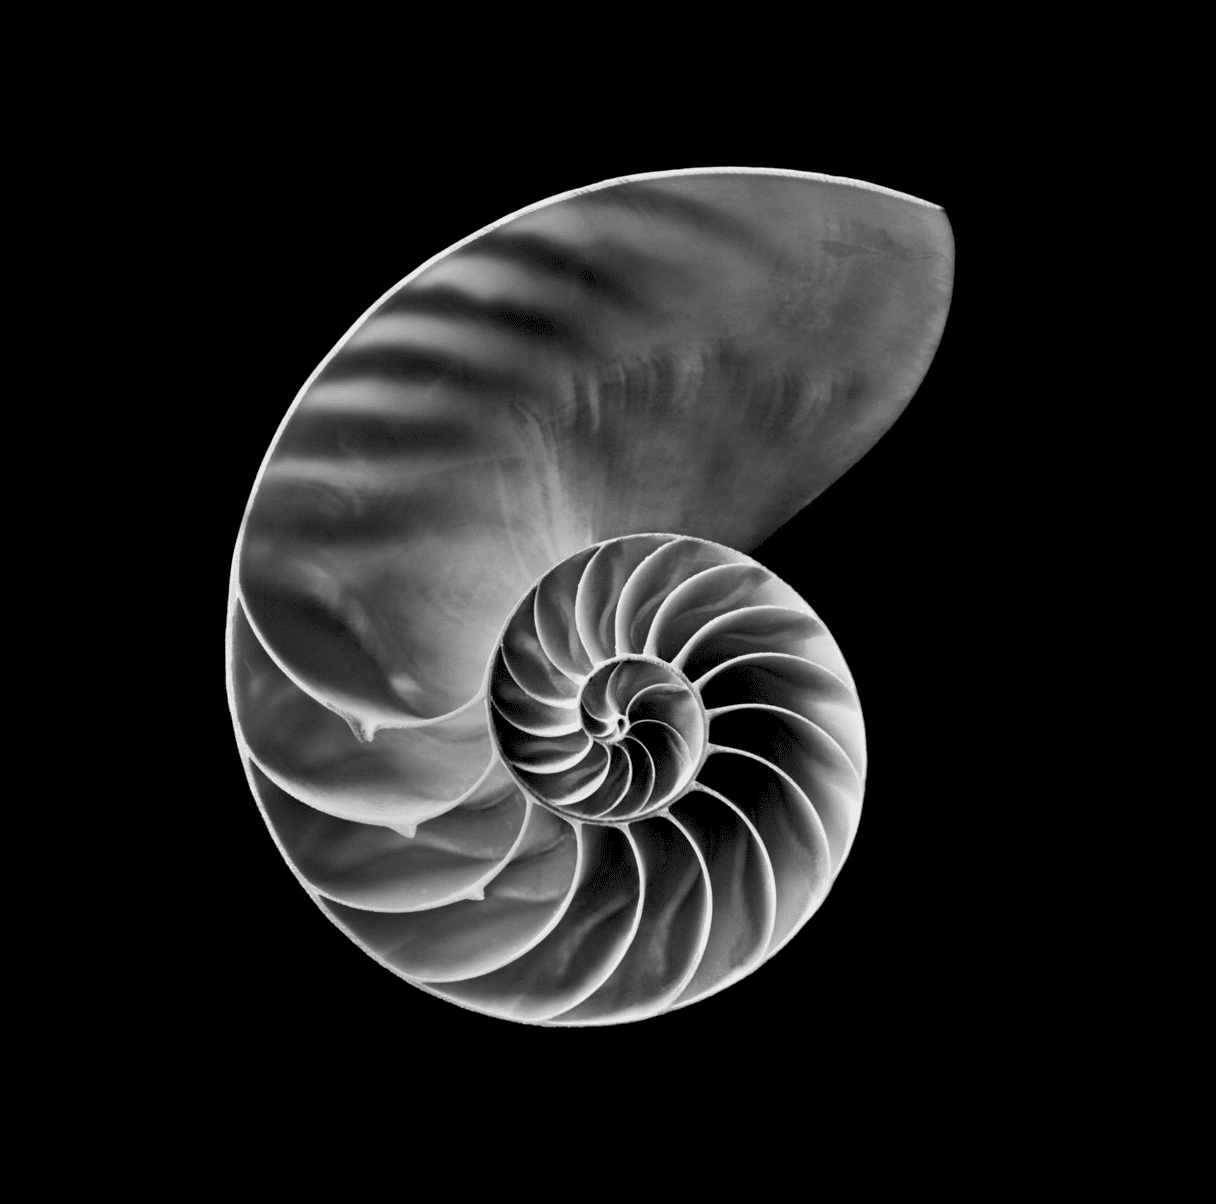 The Golden Mean- Nautilus shell photograph by Javiera Estrada